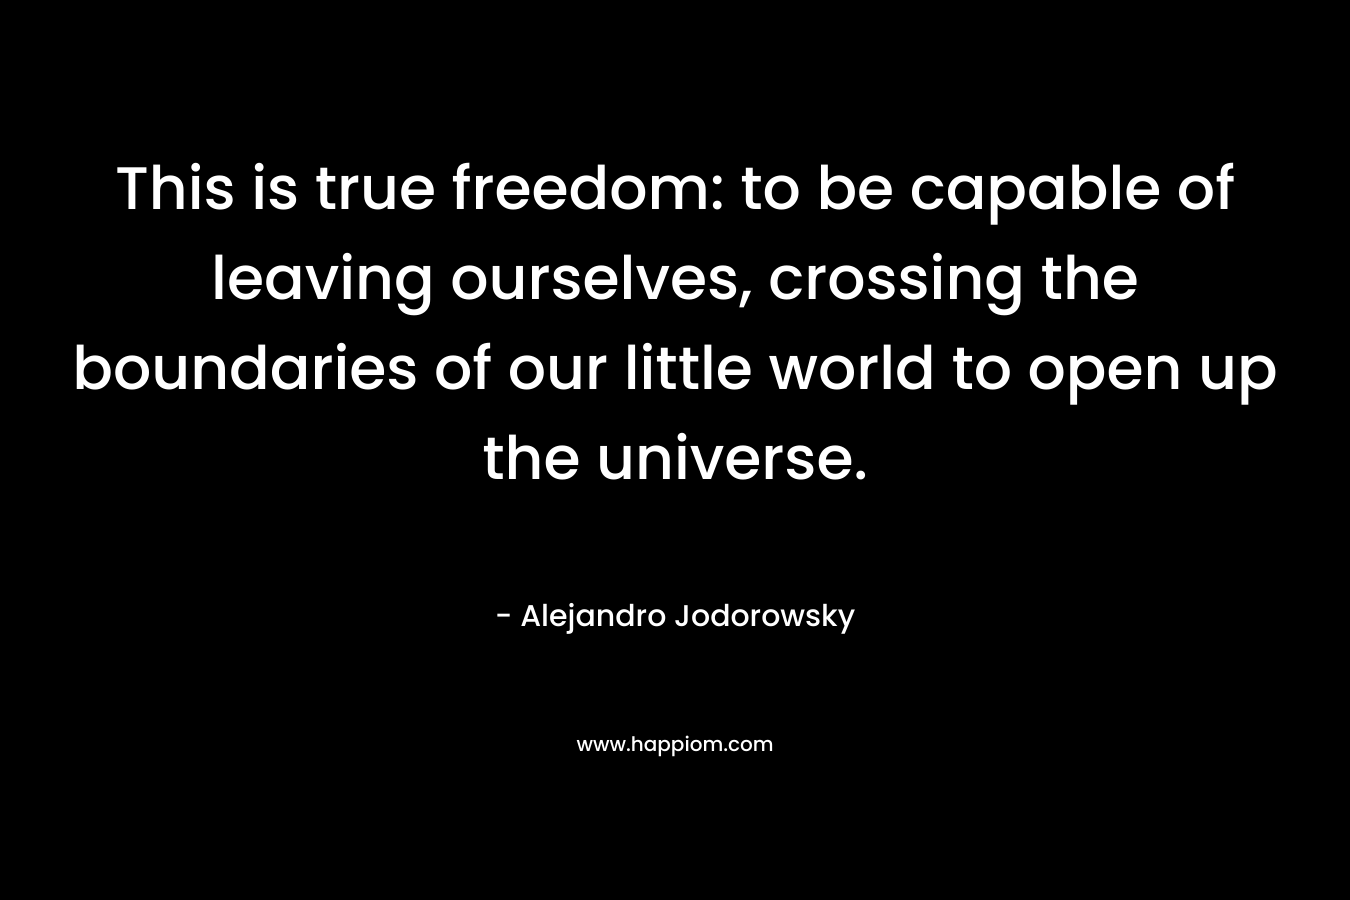 This is true freedom: to be capable of leaving ourselves, crossing the boundaries of our little world to open up the universe. – Alejandro Jodorowsky